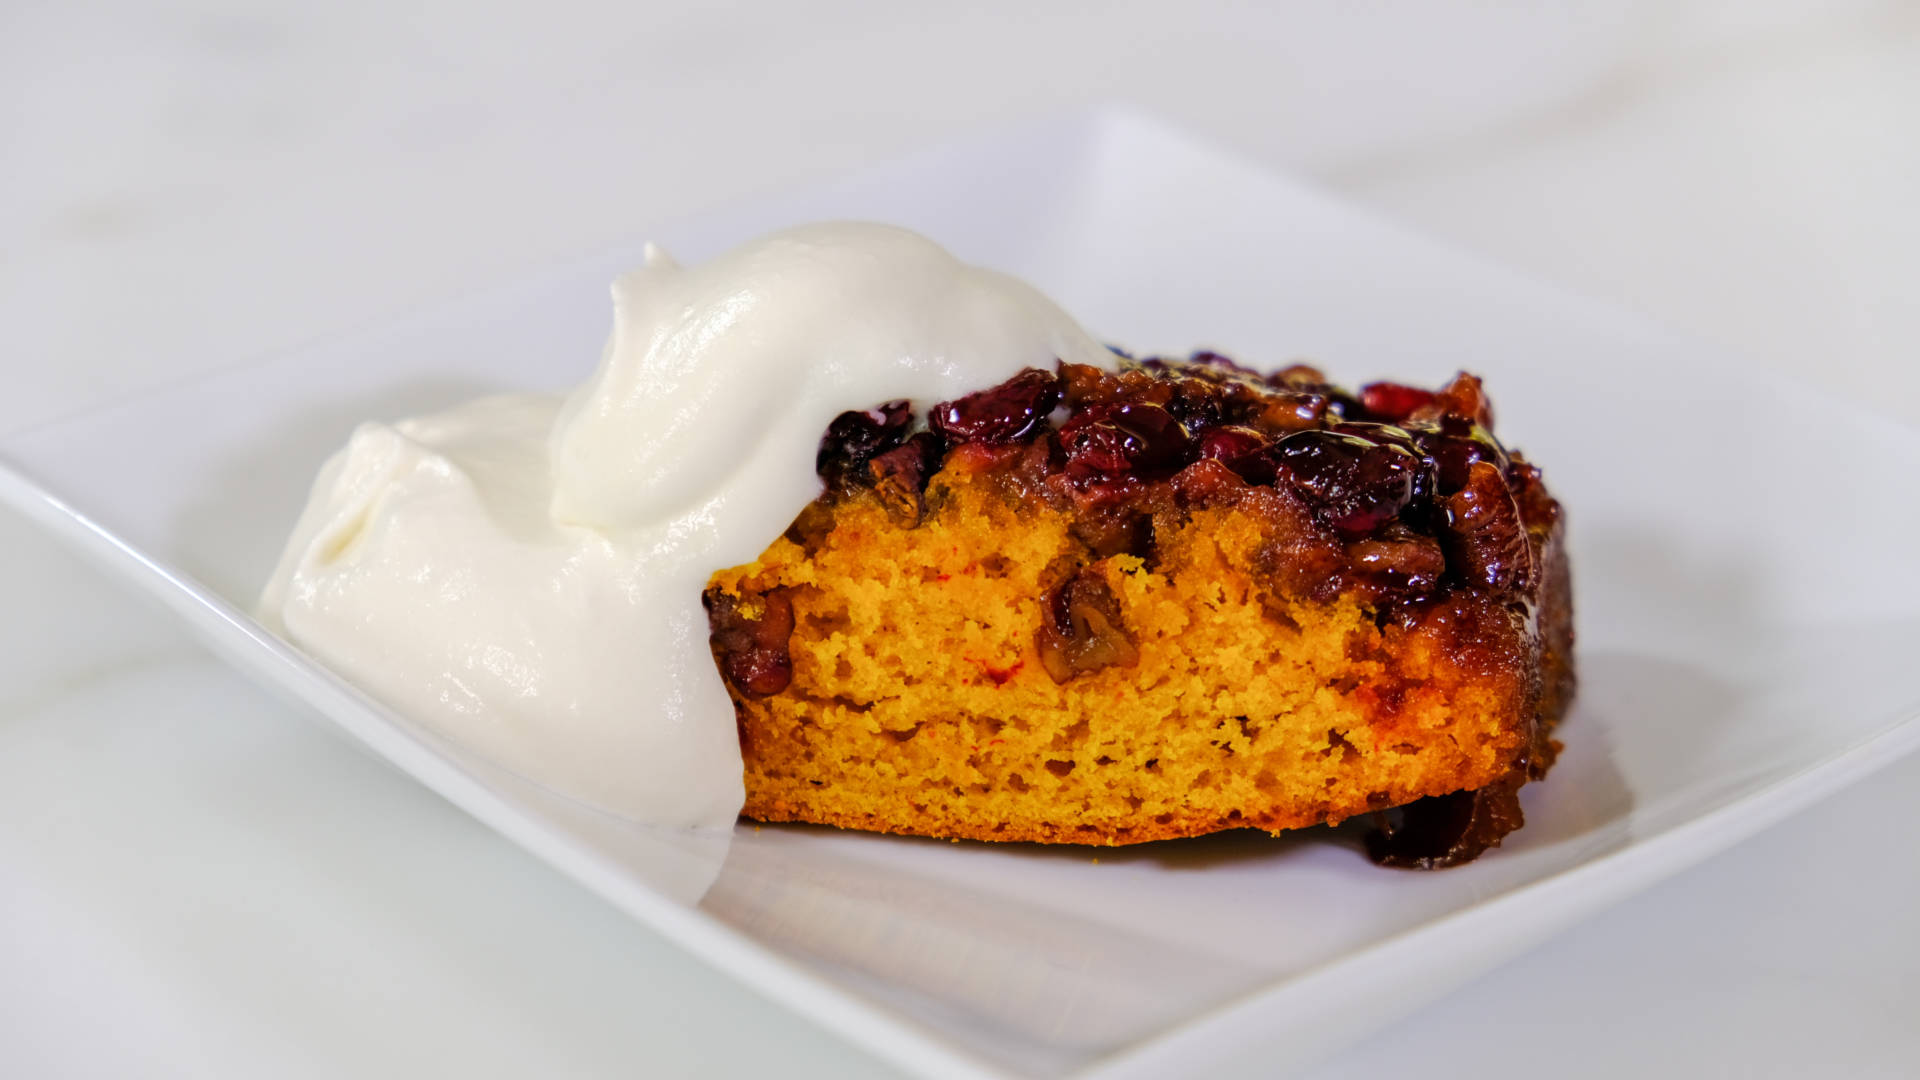 Emily Luchetti's Pumpkin Upside-Down Cake topped with fresh whipped cream.